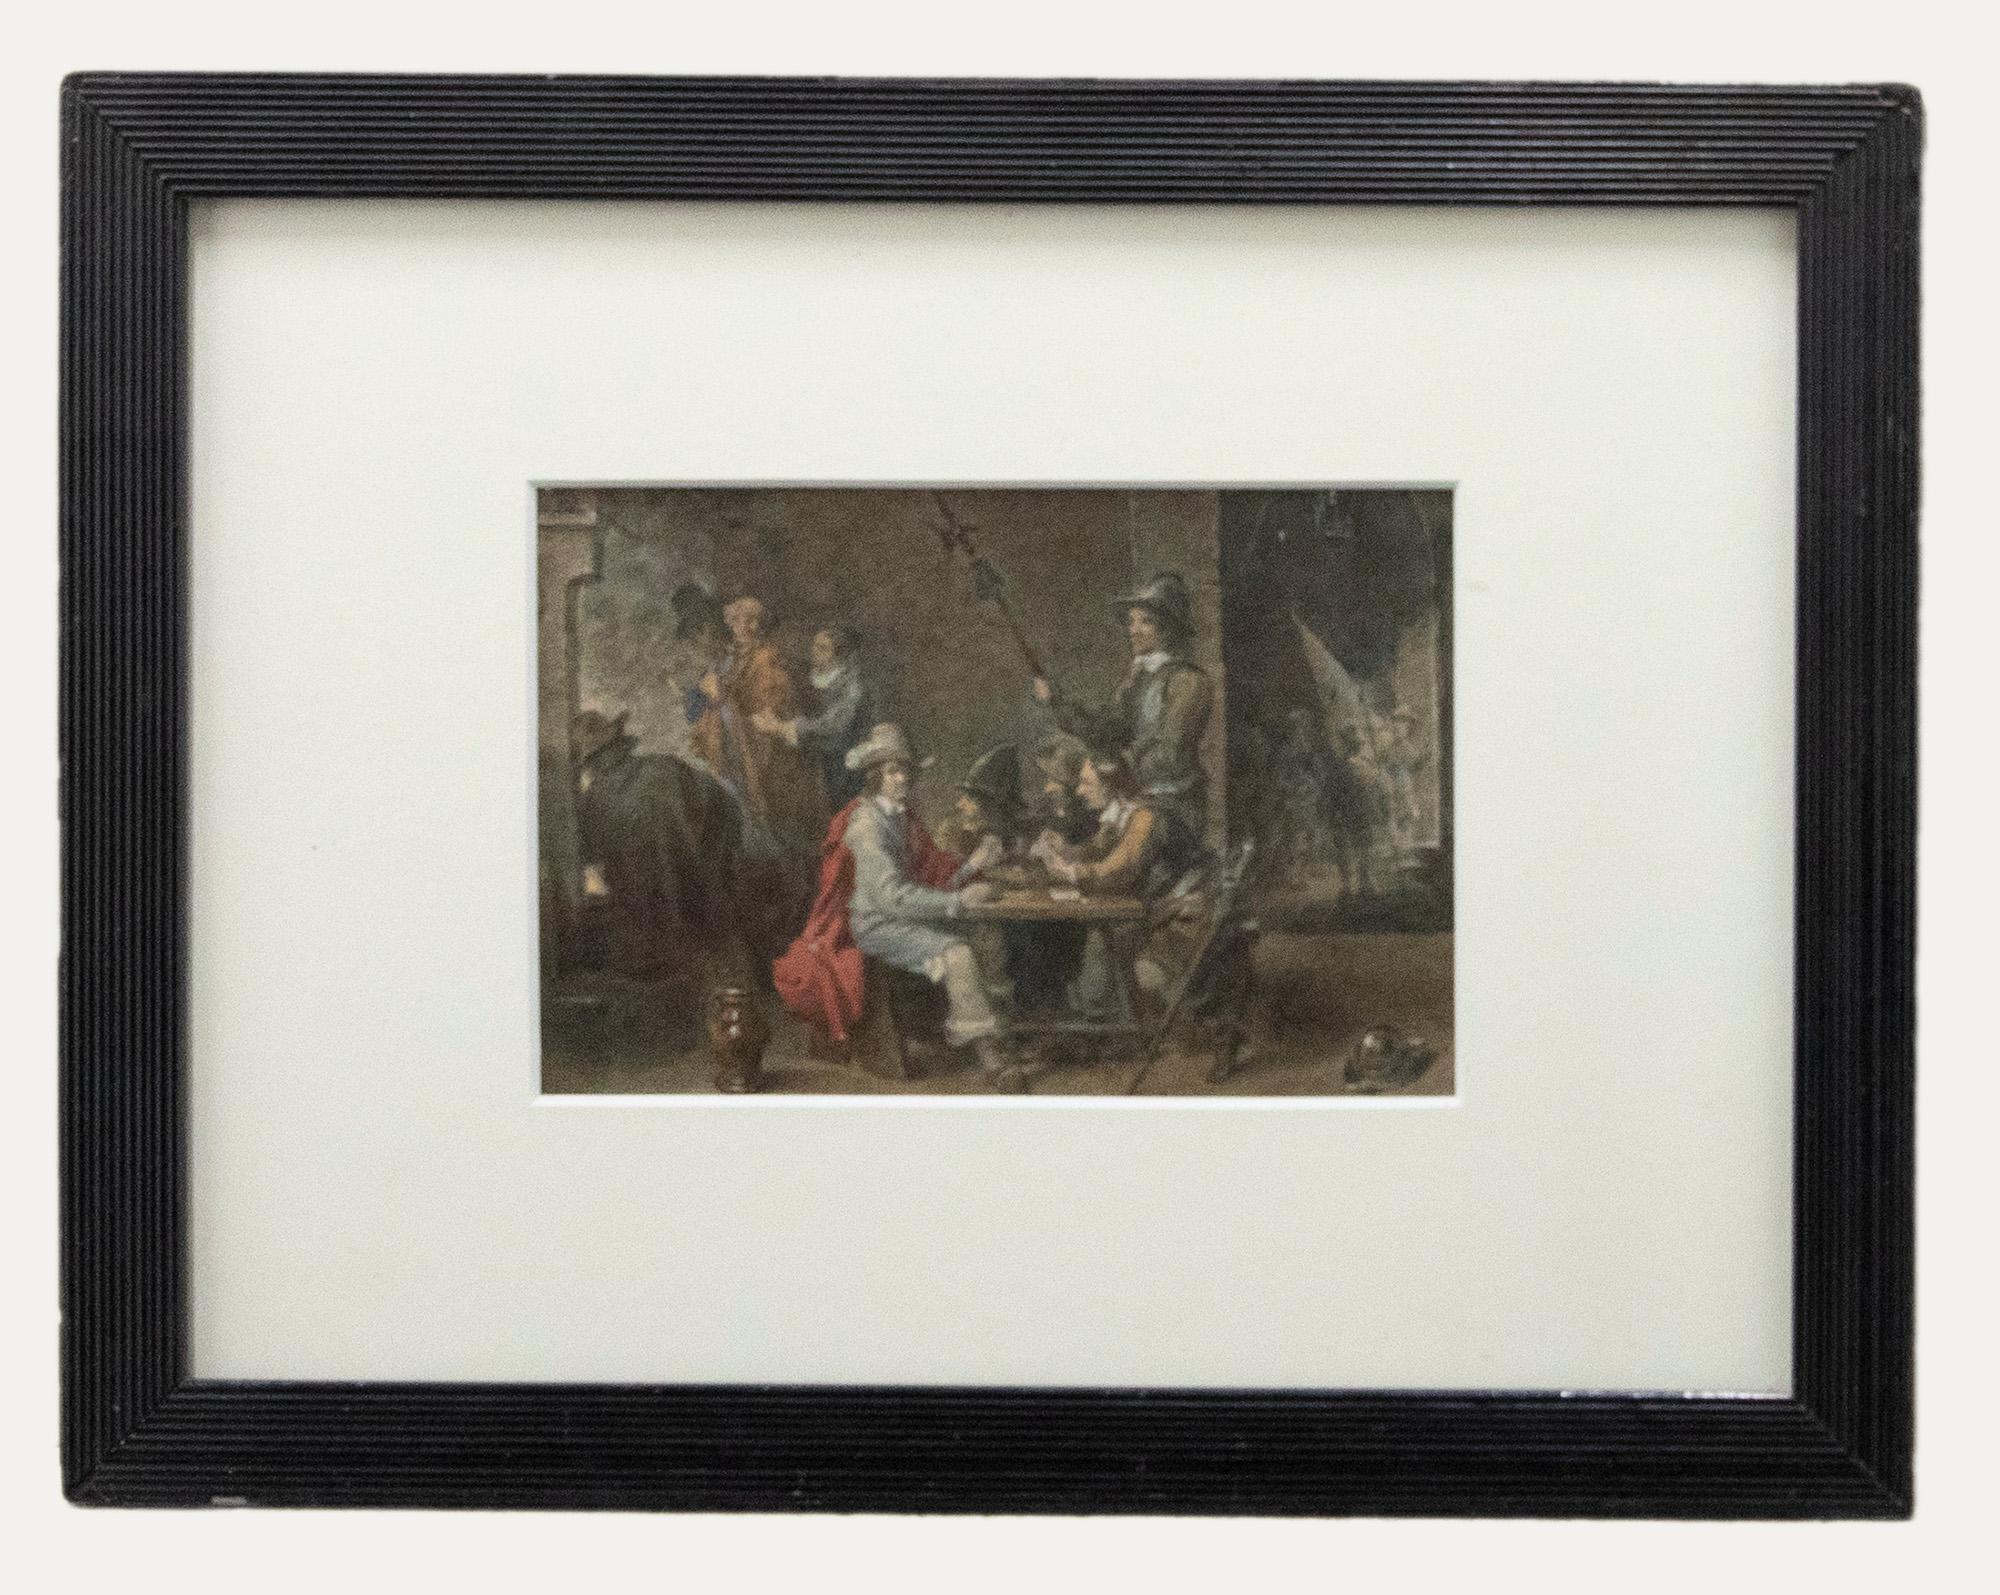 Unknown Figurative Art - Framed 19th Century Watercolour - Dutch Figures in an Interior